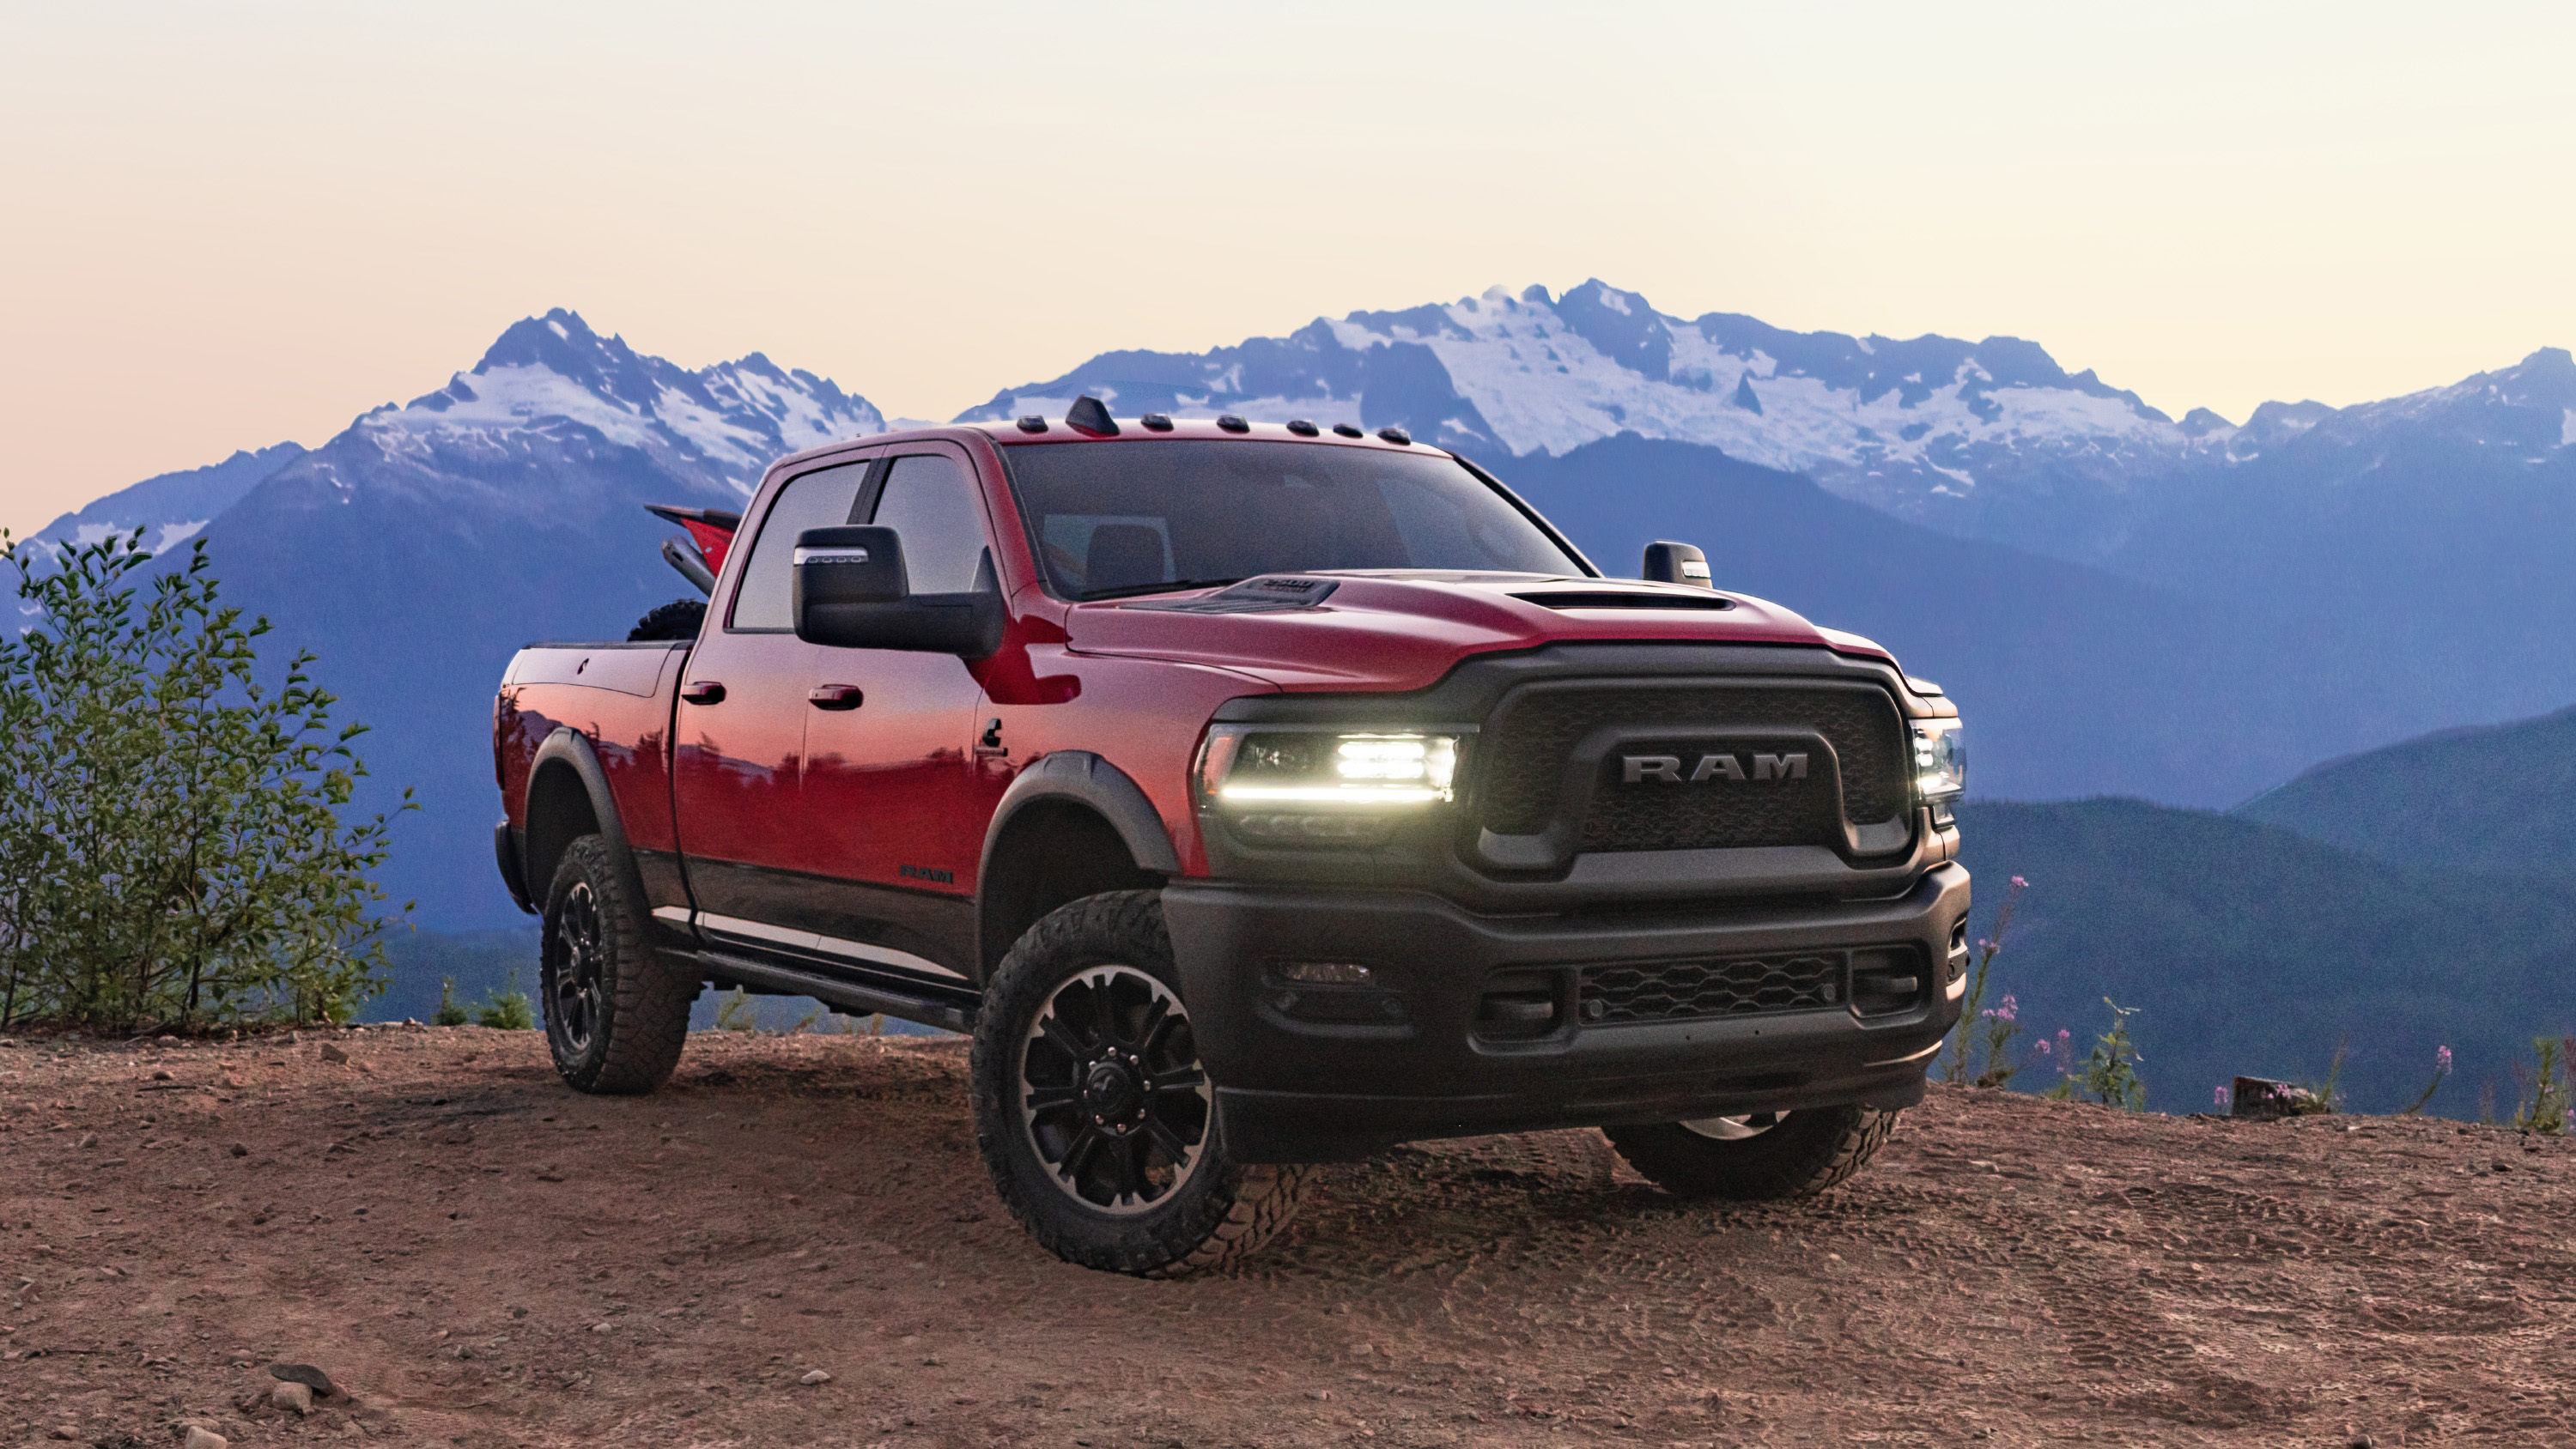 2023 Ram Rebel 2500 HD adds the diesel engine you can't have in the